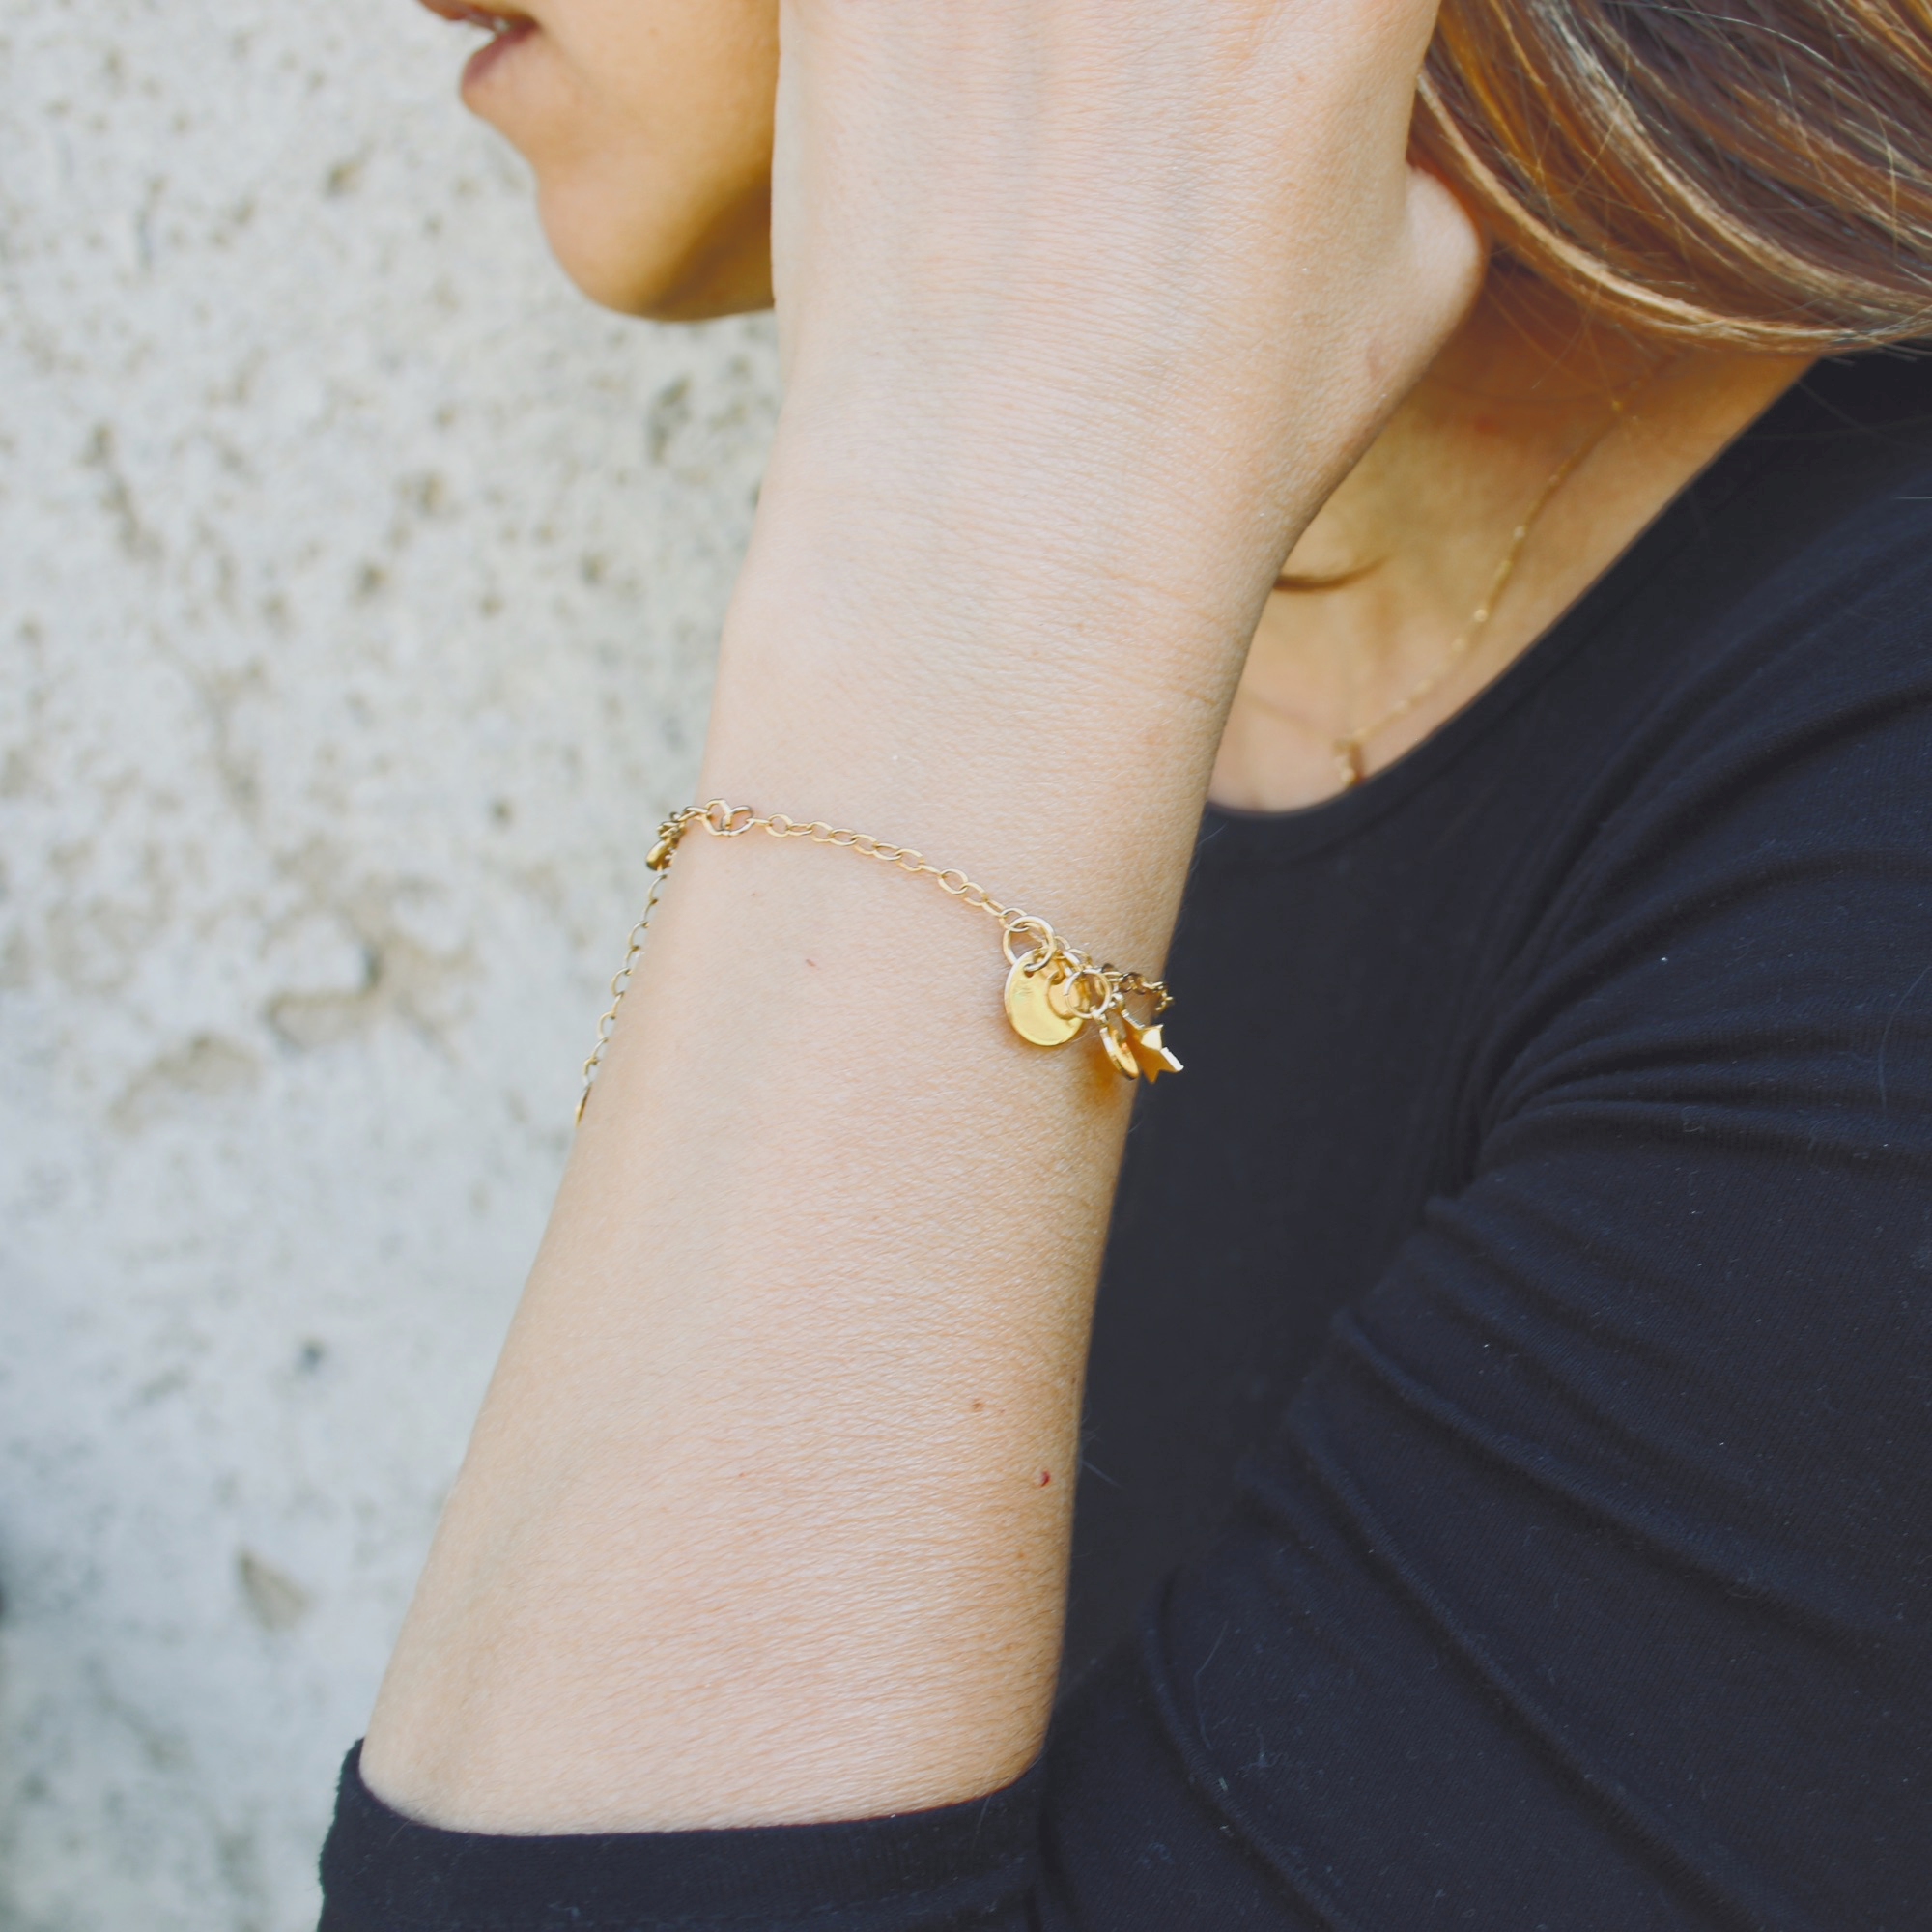 a model featured a hand with gold bracelets with gold charms 